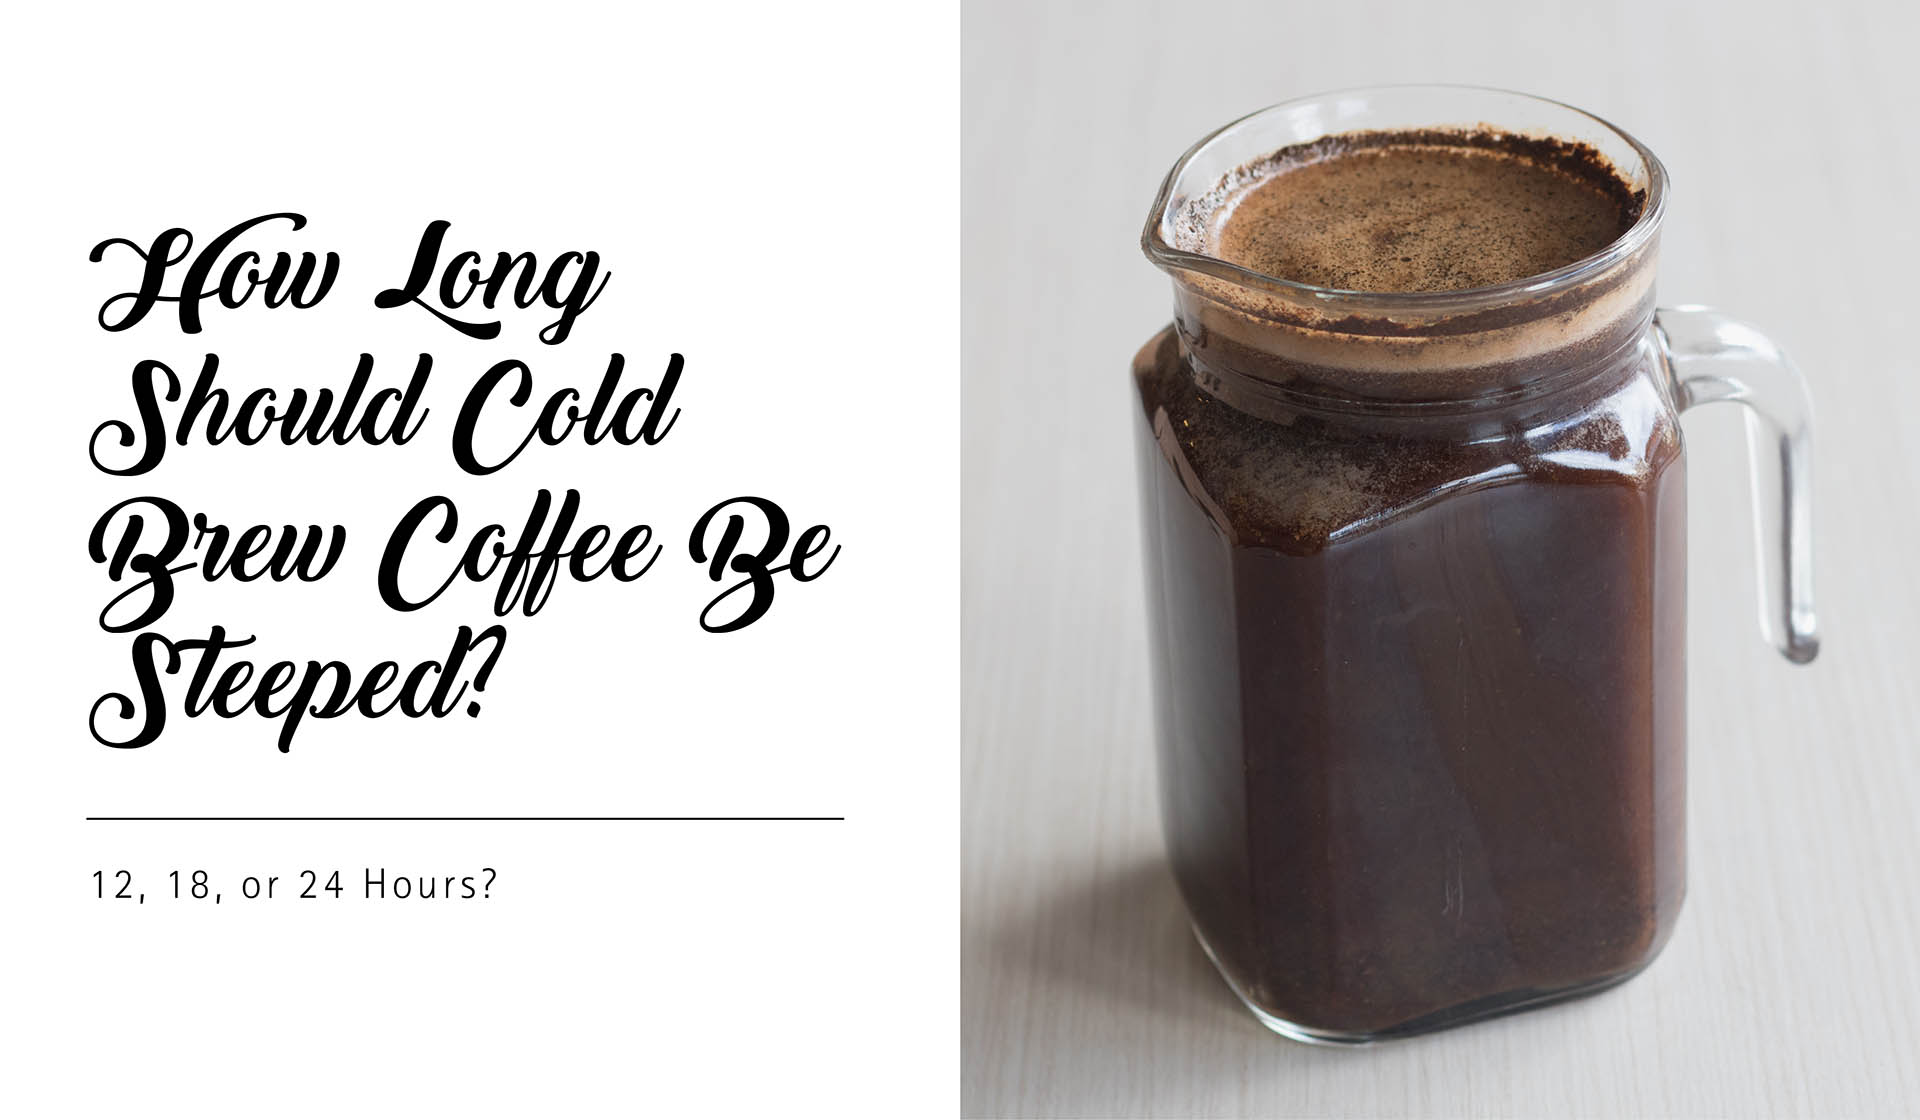 Should Cold Brew Coffee Be Steeped for 12, 18, or 24 Hours?